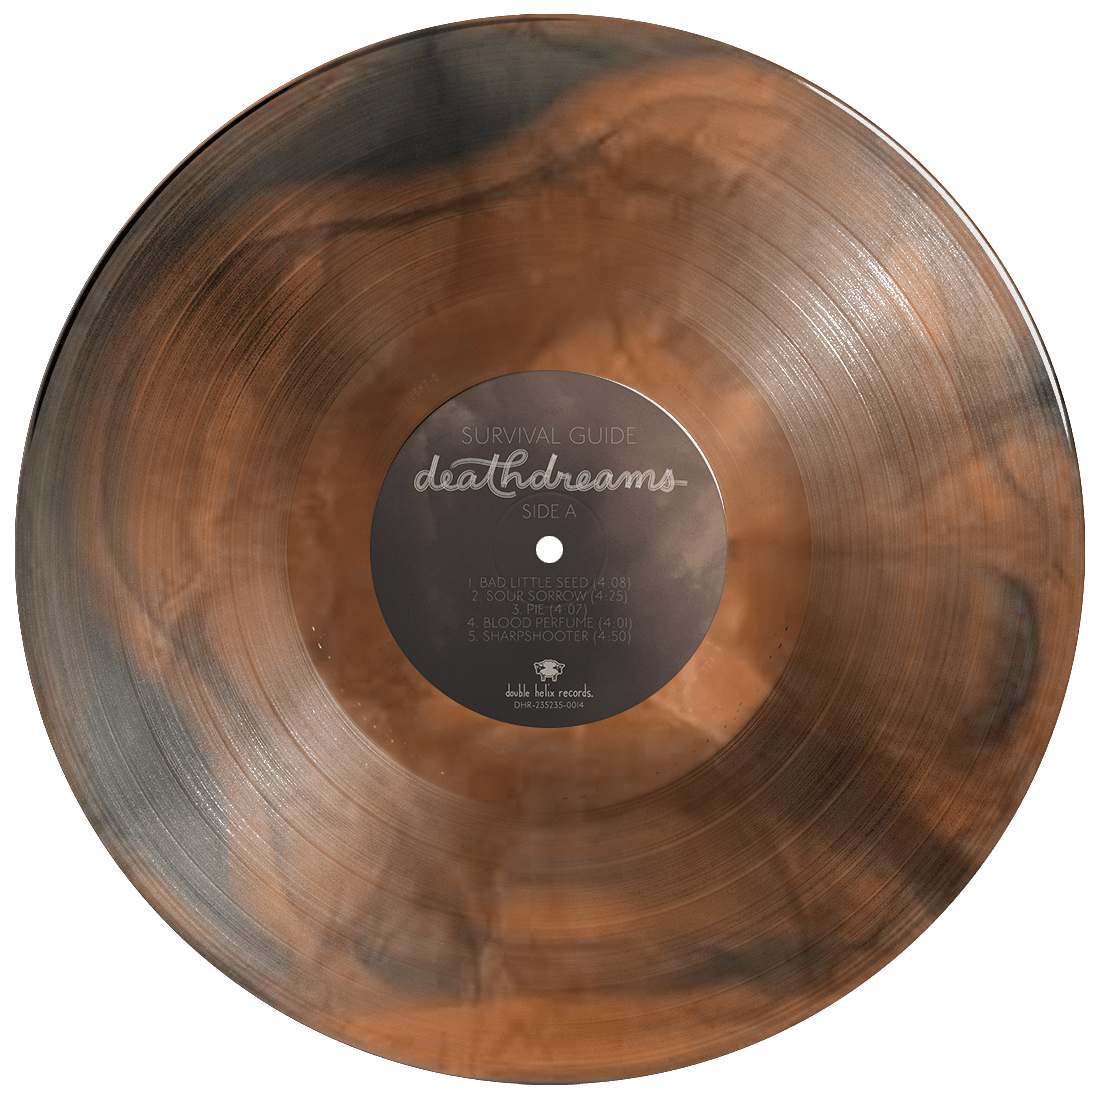 Survival Guide: deathdreams Cloud Variant Vinyl (Limited to 100)